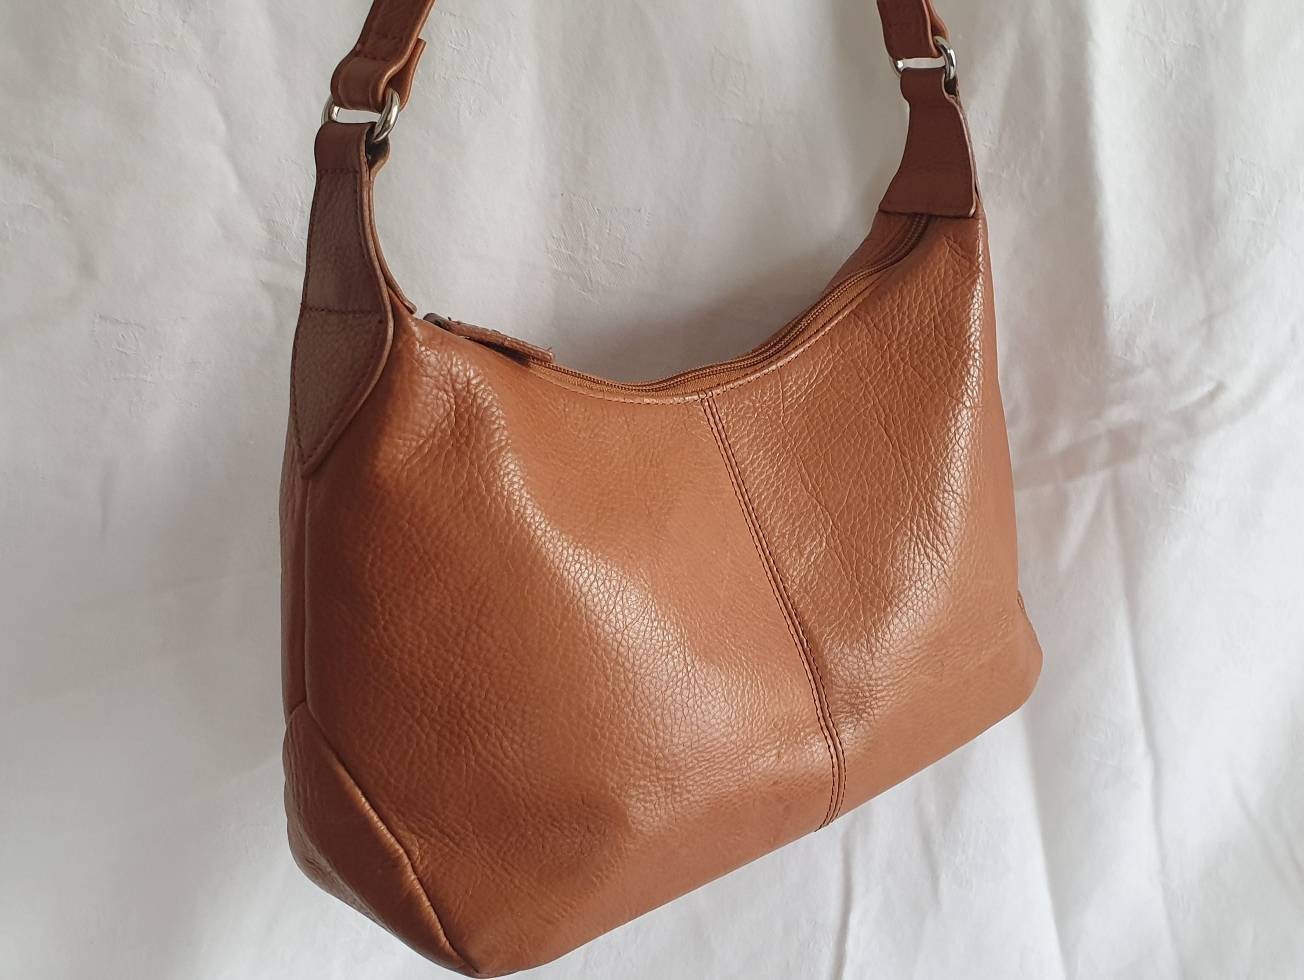 Wilson Leather Red Purse for Sale in Vancouver WA  OfferUp